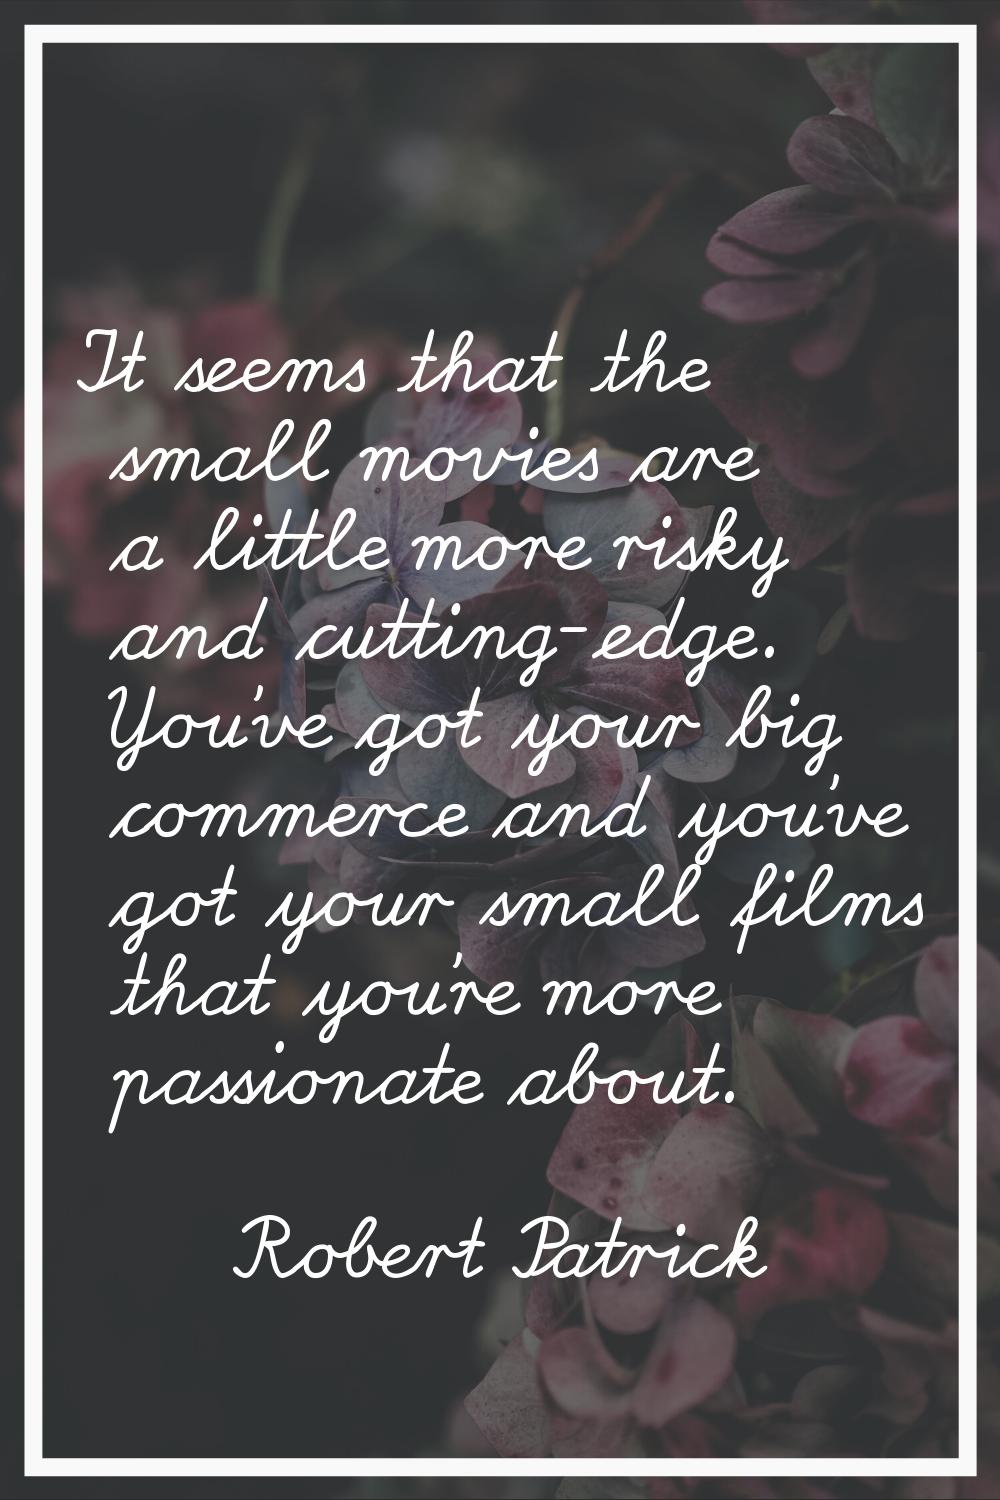 It seems that the small movies are a little more risky and cutting-edge. You've got your big commer